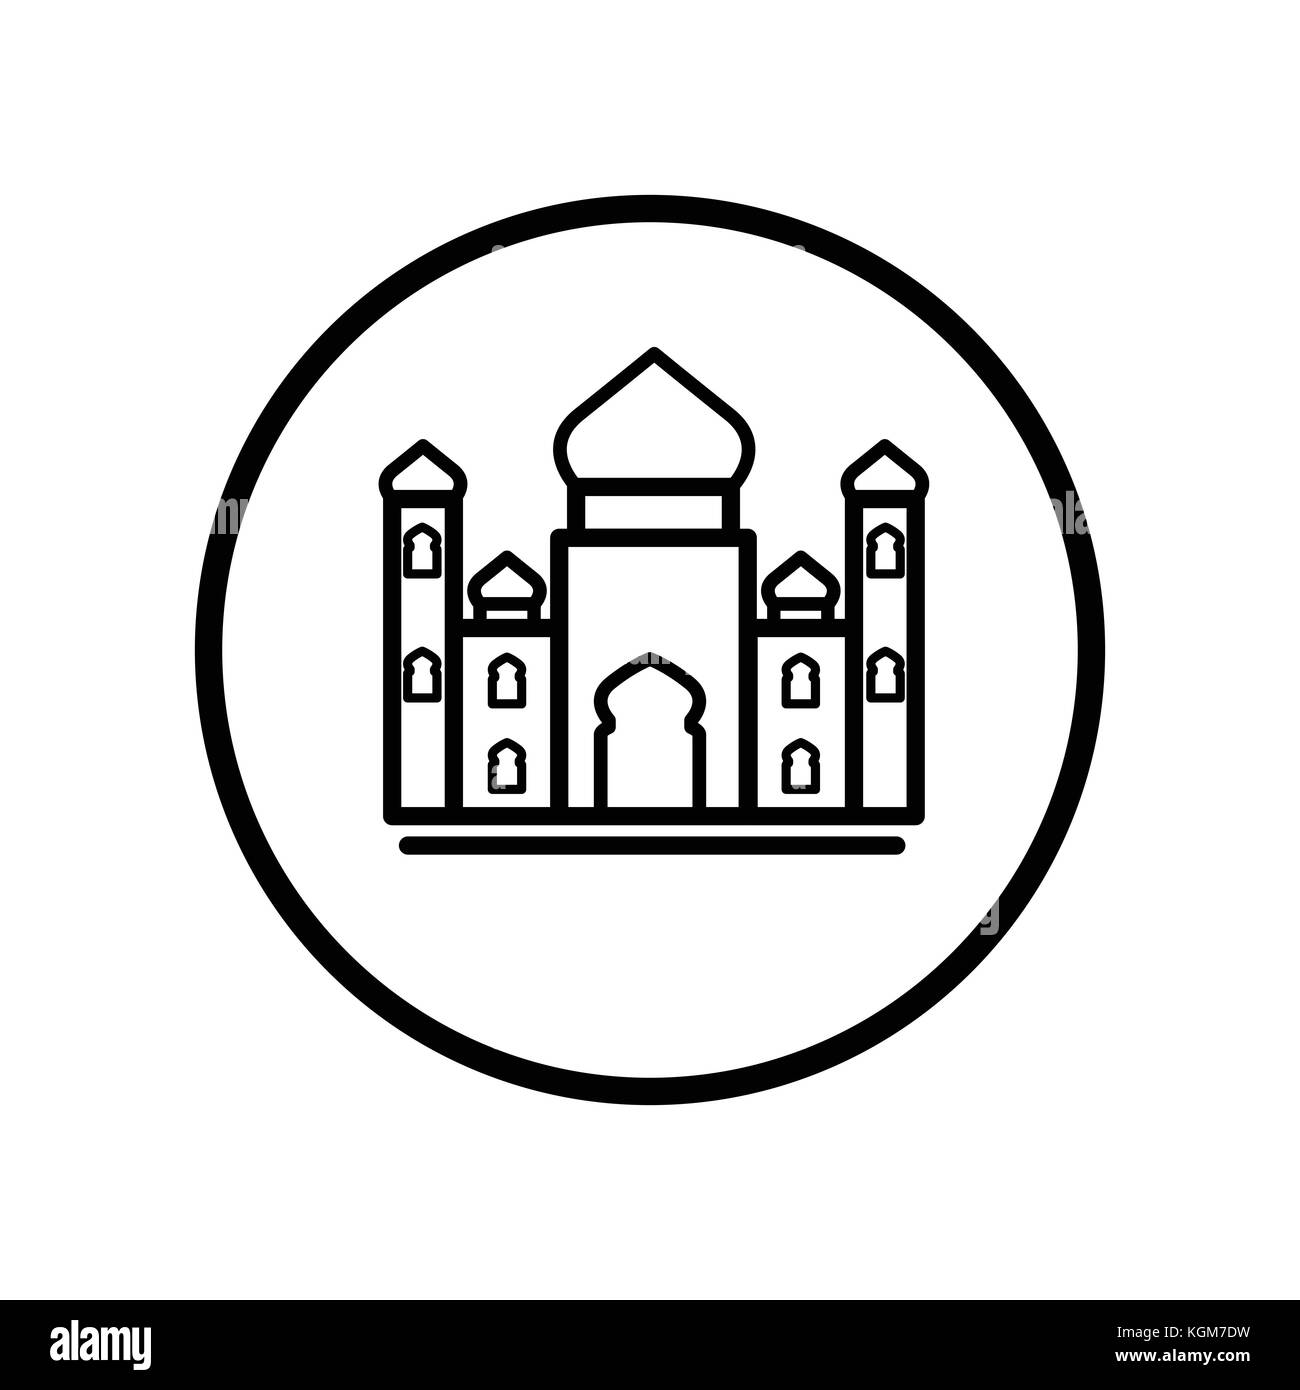 Islamic Icon, Mosque icon in Circle line, iconic symbol inside a circle, on white background, for Islamic sign concept. Vector Iconic Design. Stock Vector